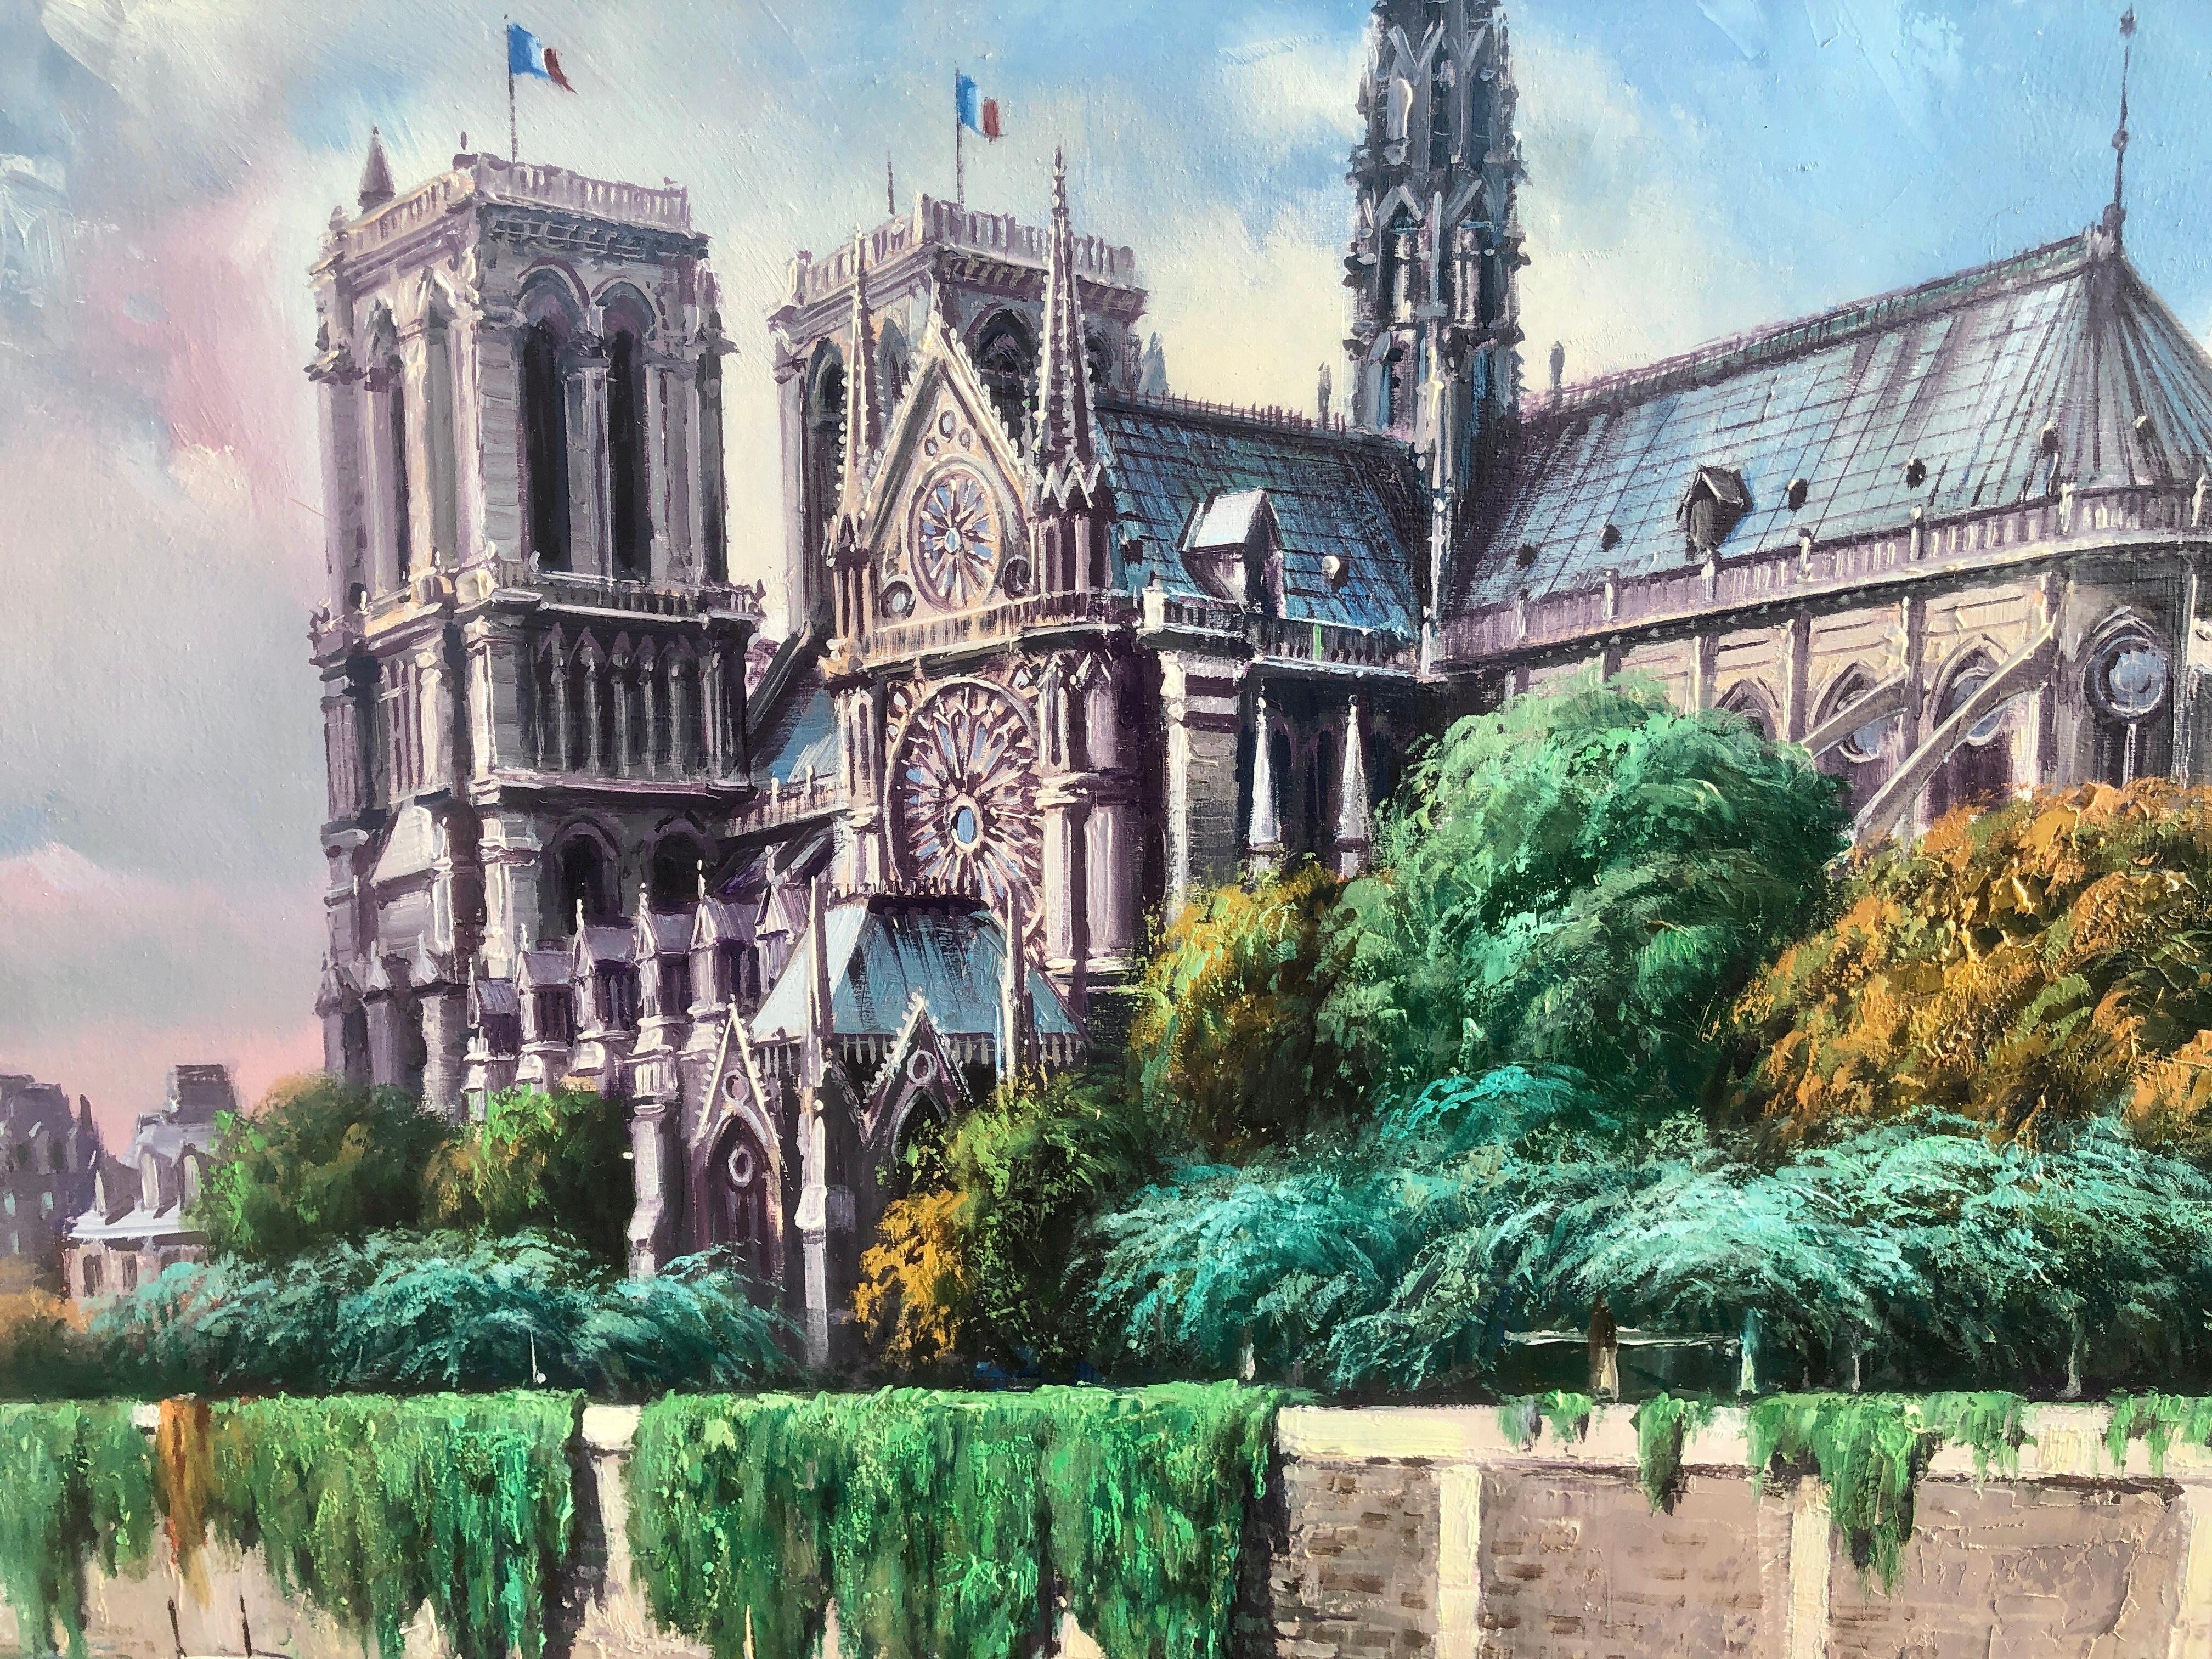 Notre Dame Cathedral Paris France oil on canvas painting - Gray Landscape Painting by Tomas Martorell